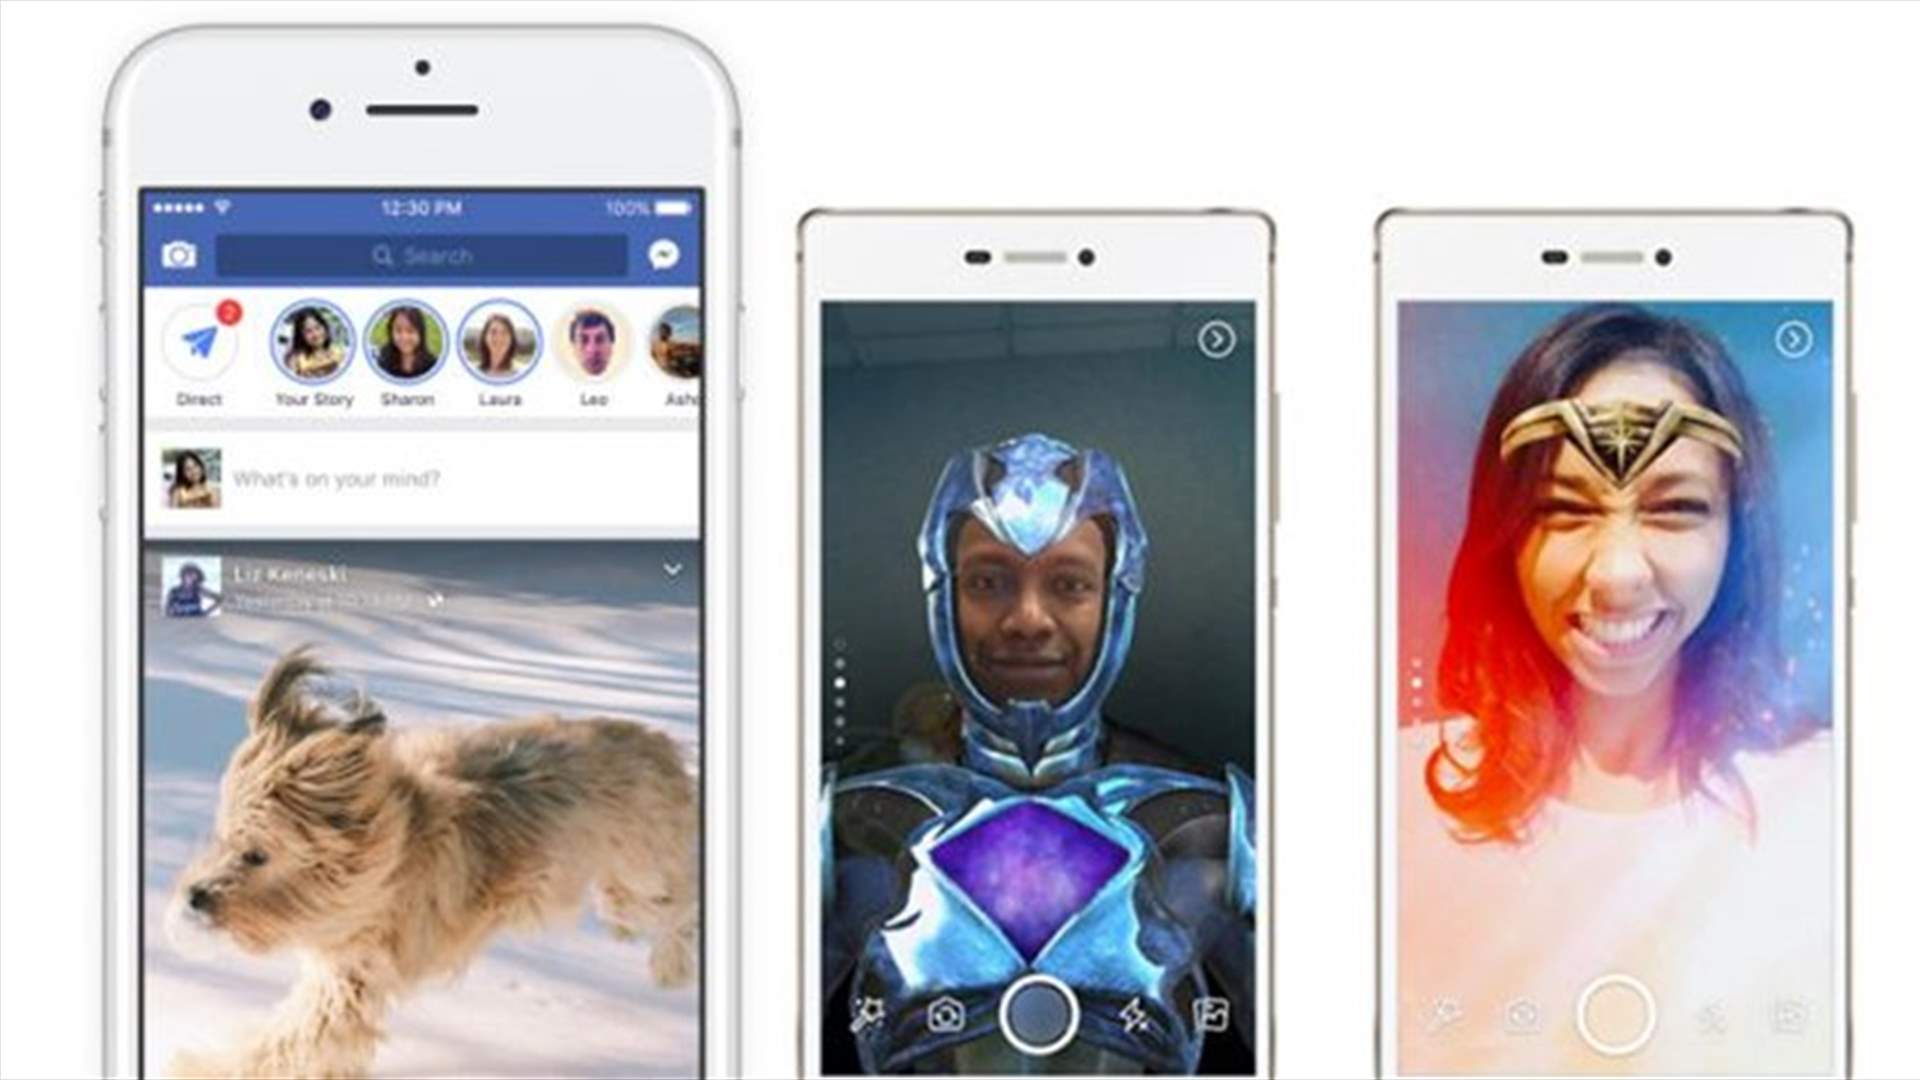 Facebook Adds Snapchat-Like Camera Filters To Instagram